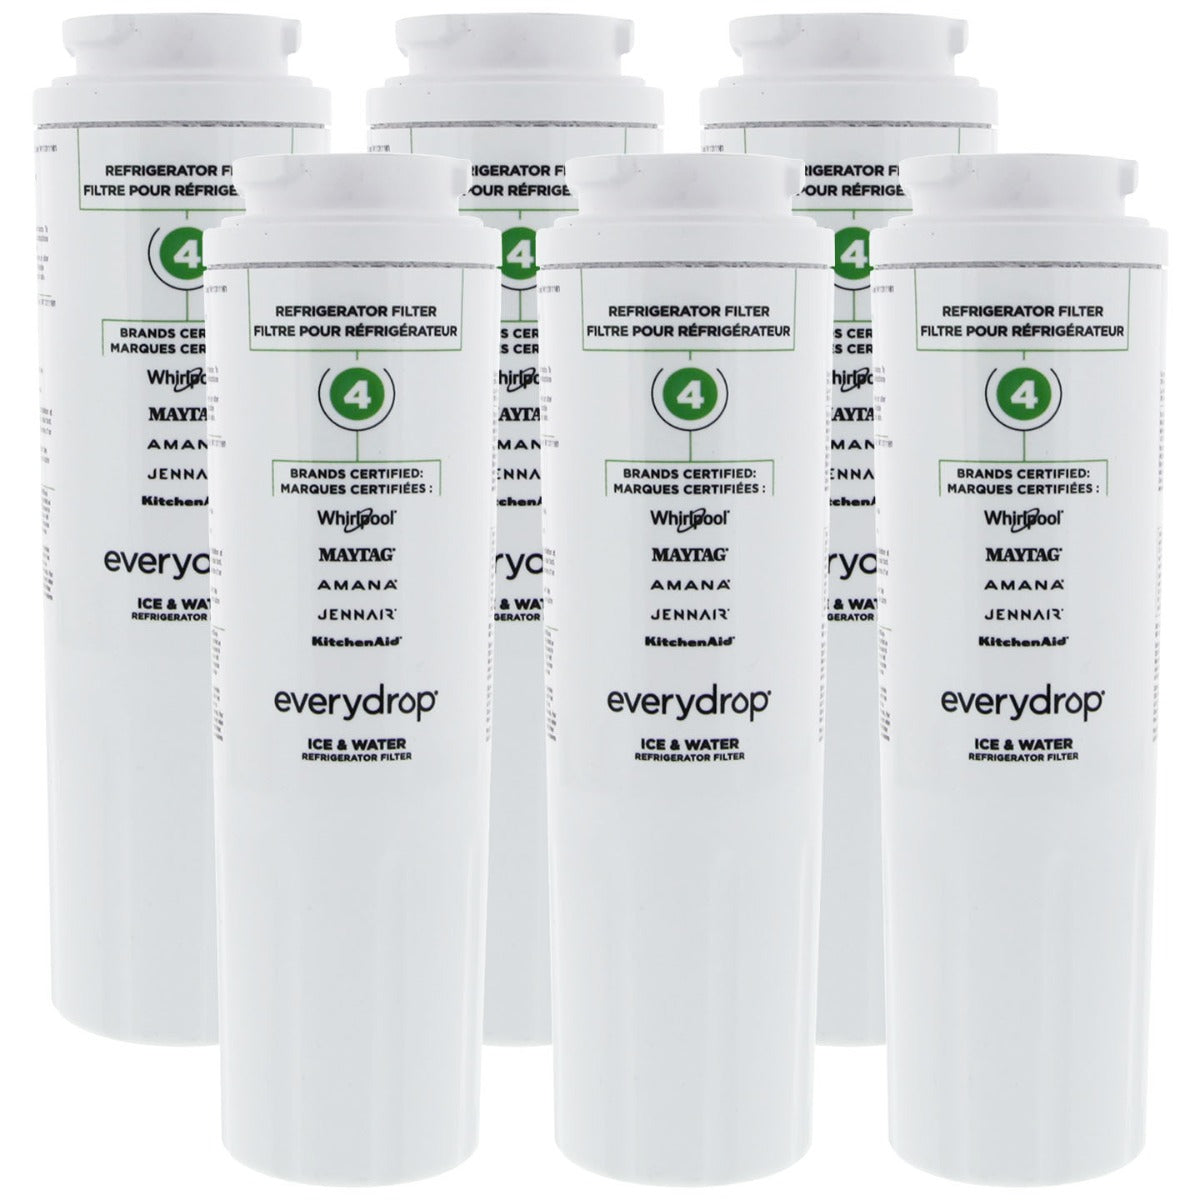 Whirlpool 4396395 and Maytag UKF8001 EveryDrop EDR4RXD1 (Filter 4) Ice and Water Refrigerator Filter